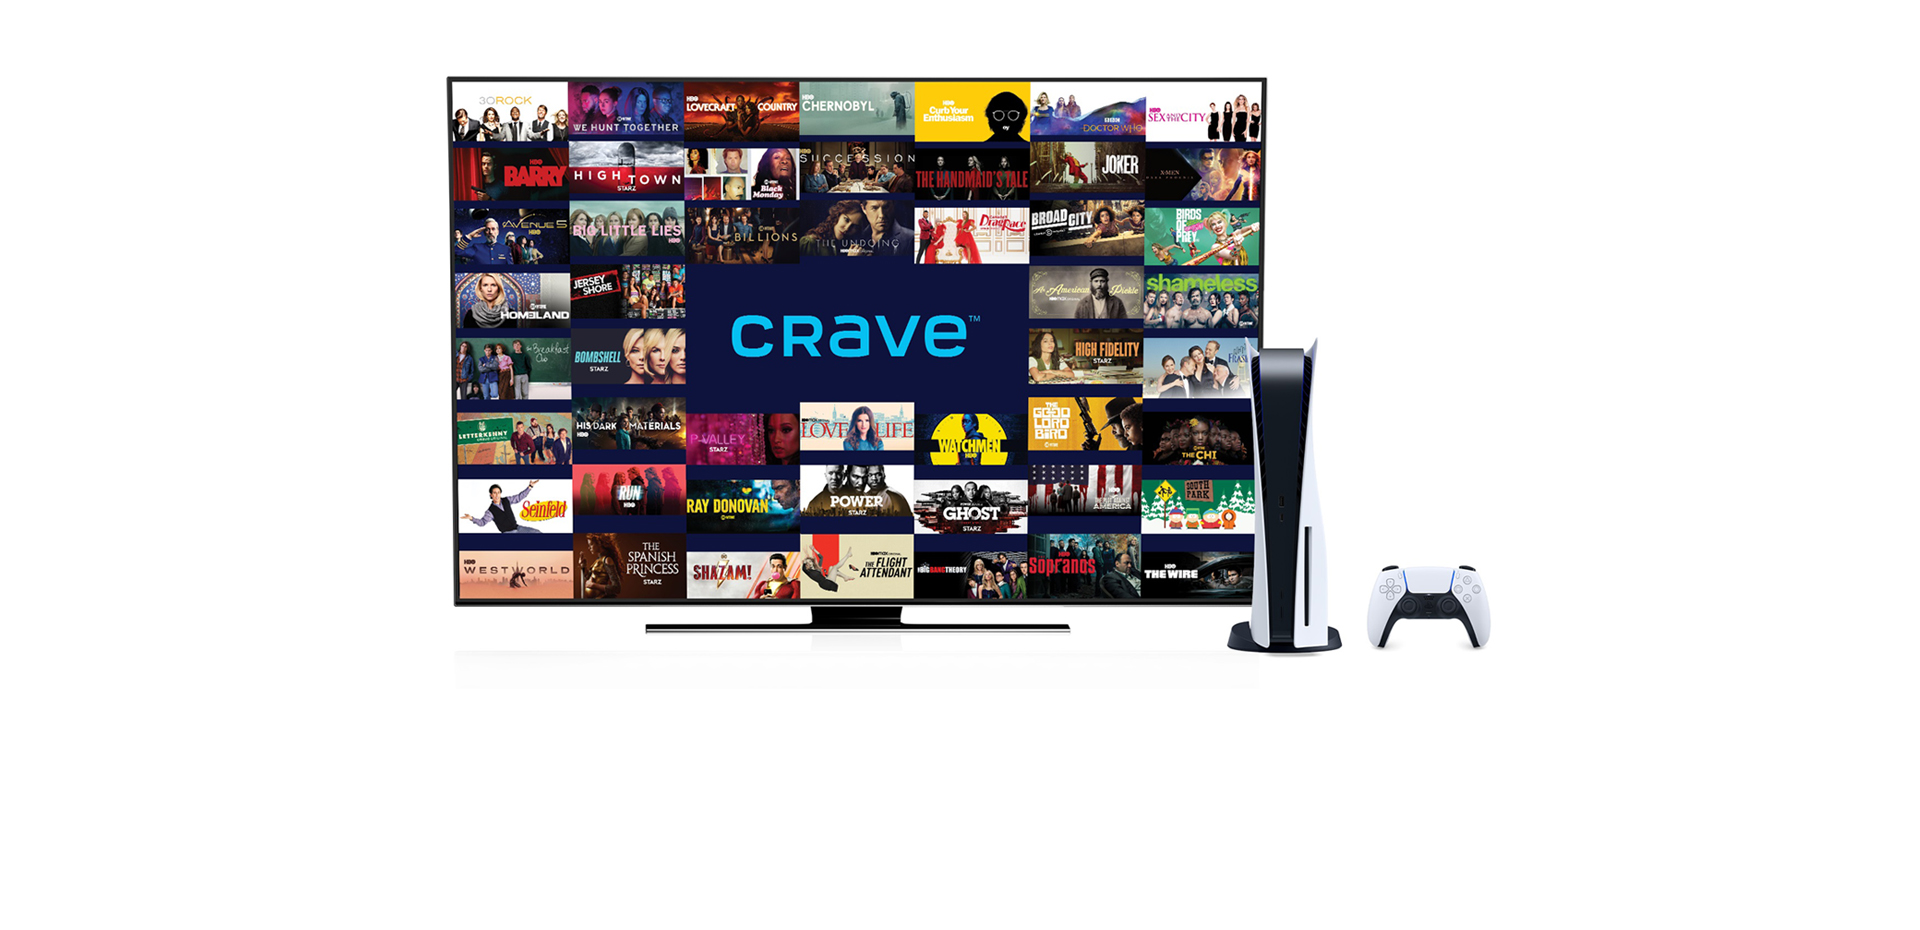 crave for ps4